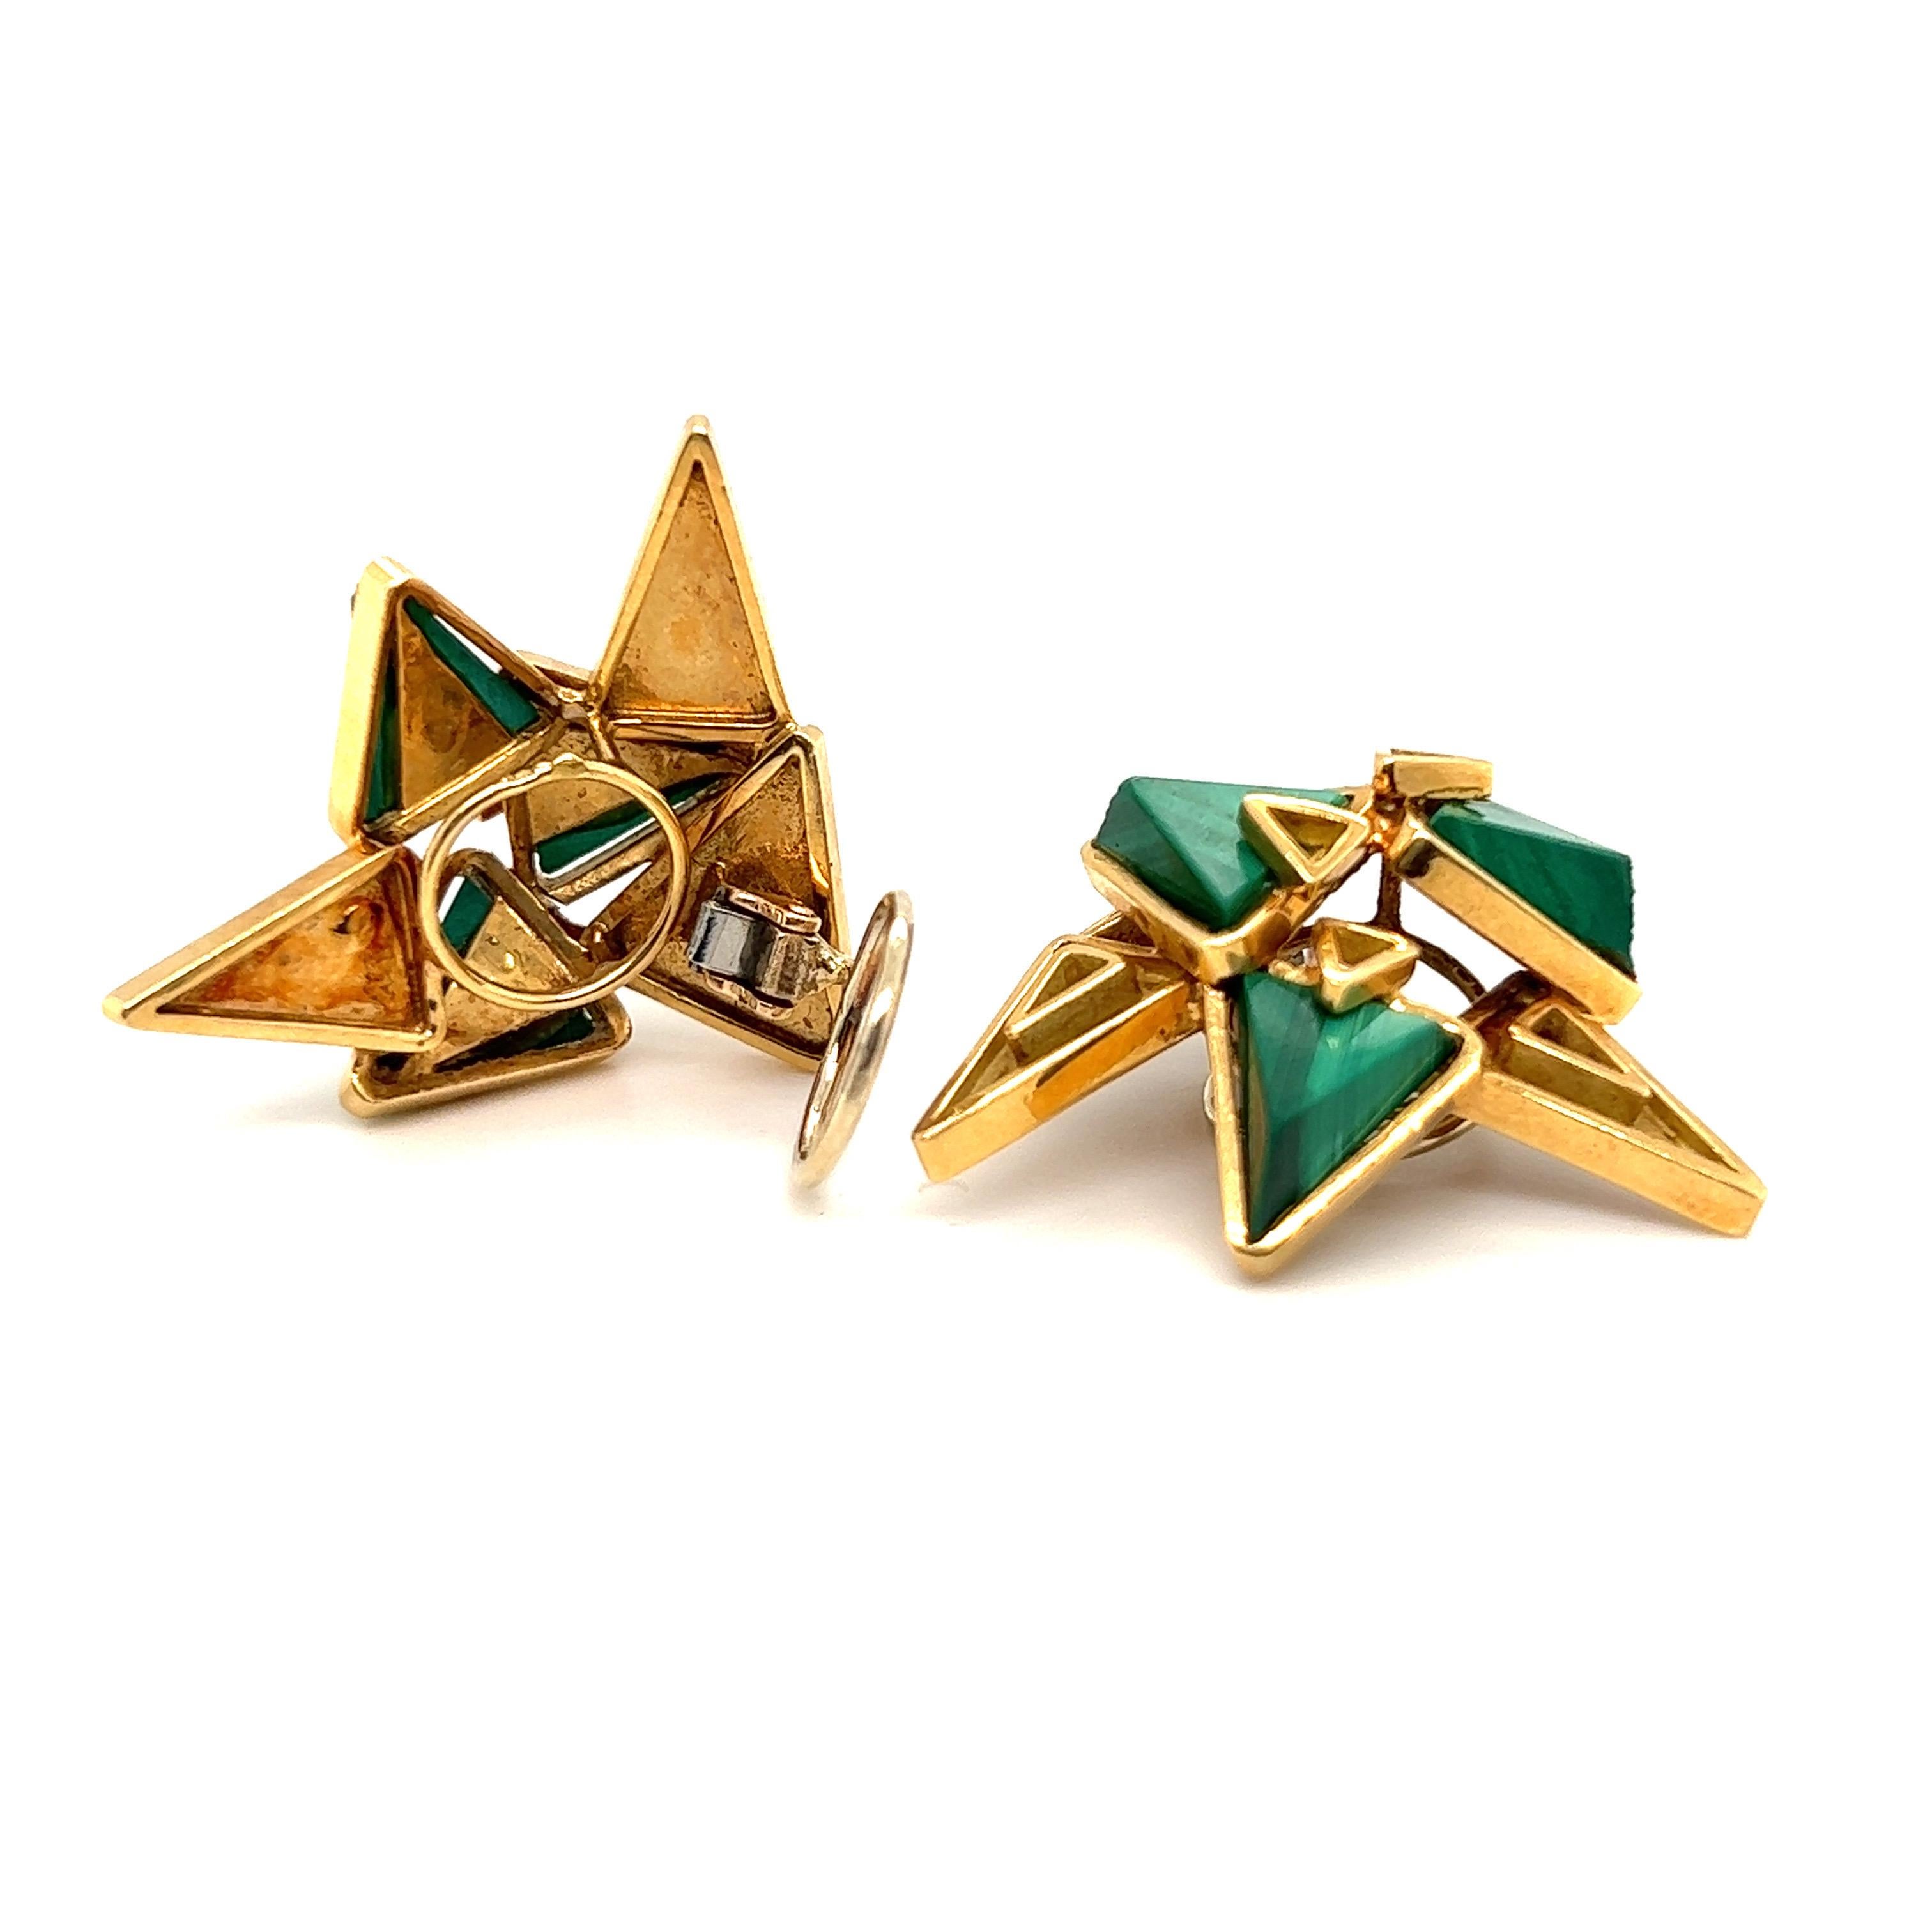 Eye-catching sculptural modernist pair of 18 karat yellow gold and malachite earrings by French jewelry house Chaumet, 1970s. 
Each designed as a cluster of triangular elements in different sizes, some of high profile finish, some set with